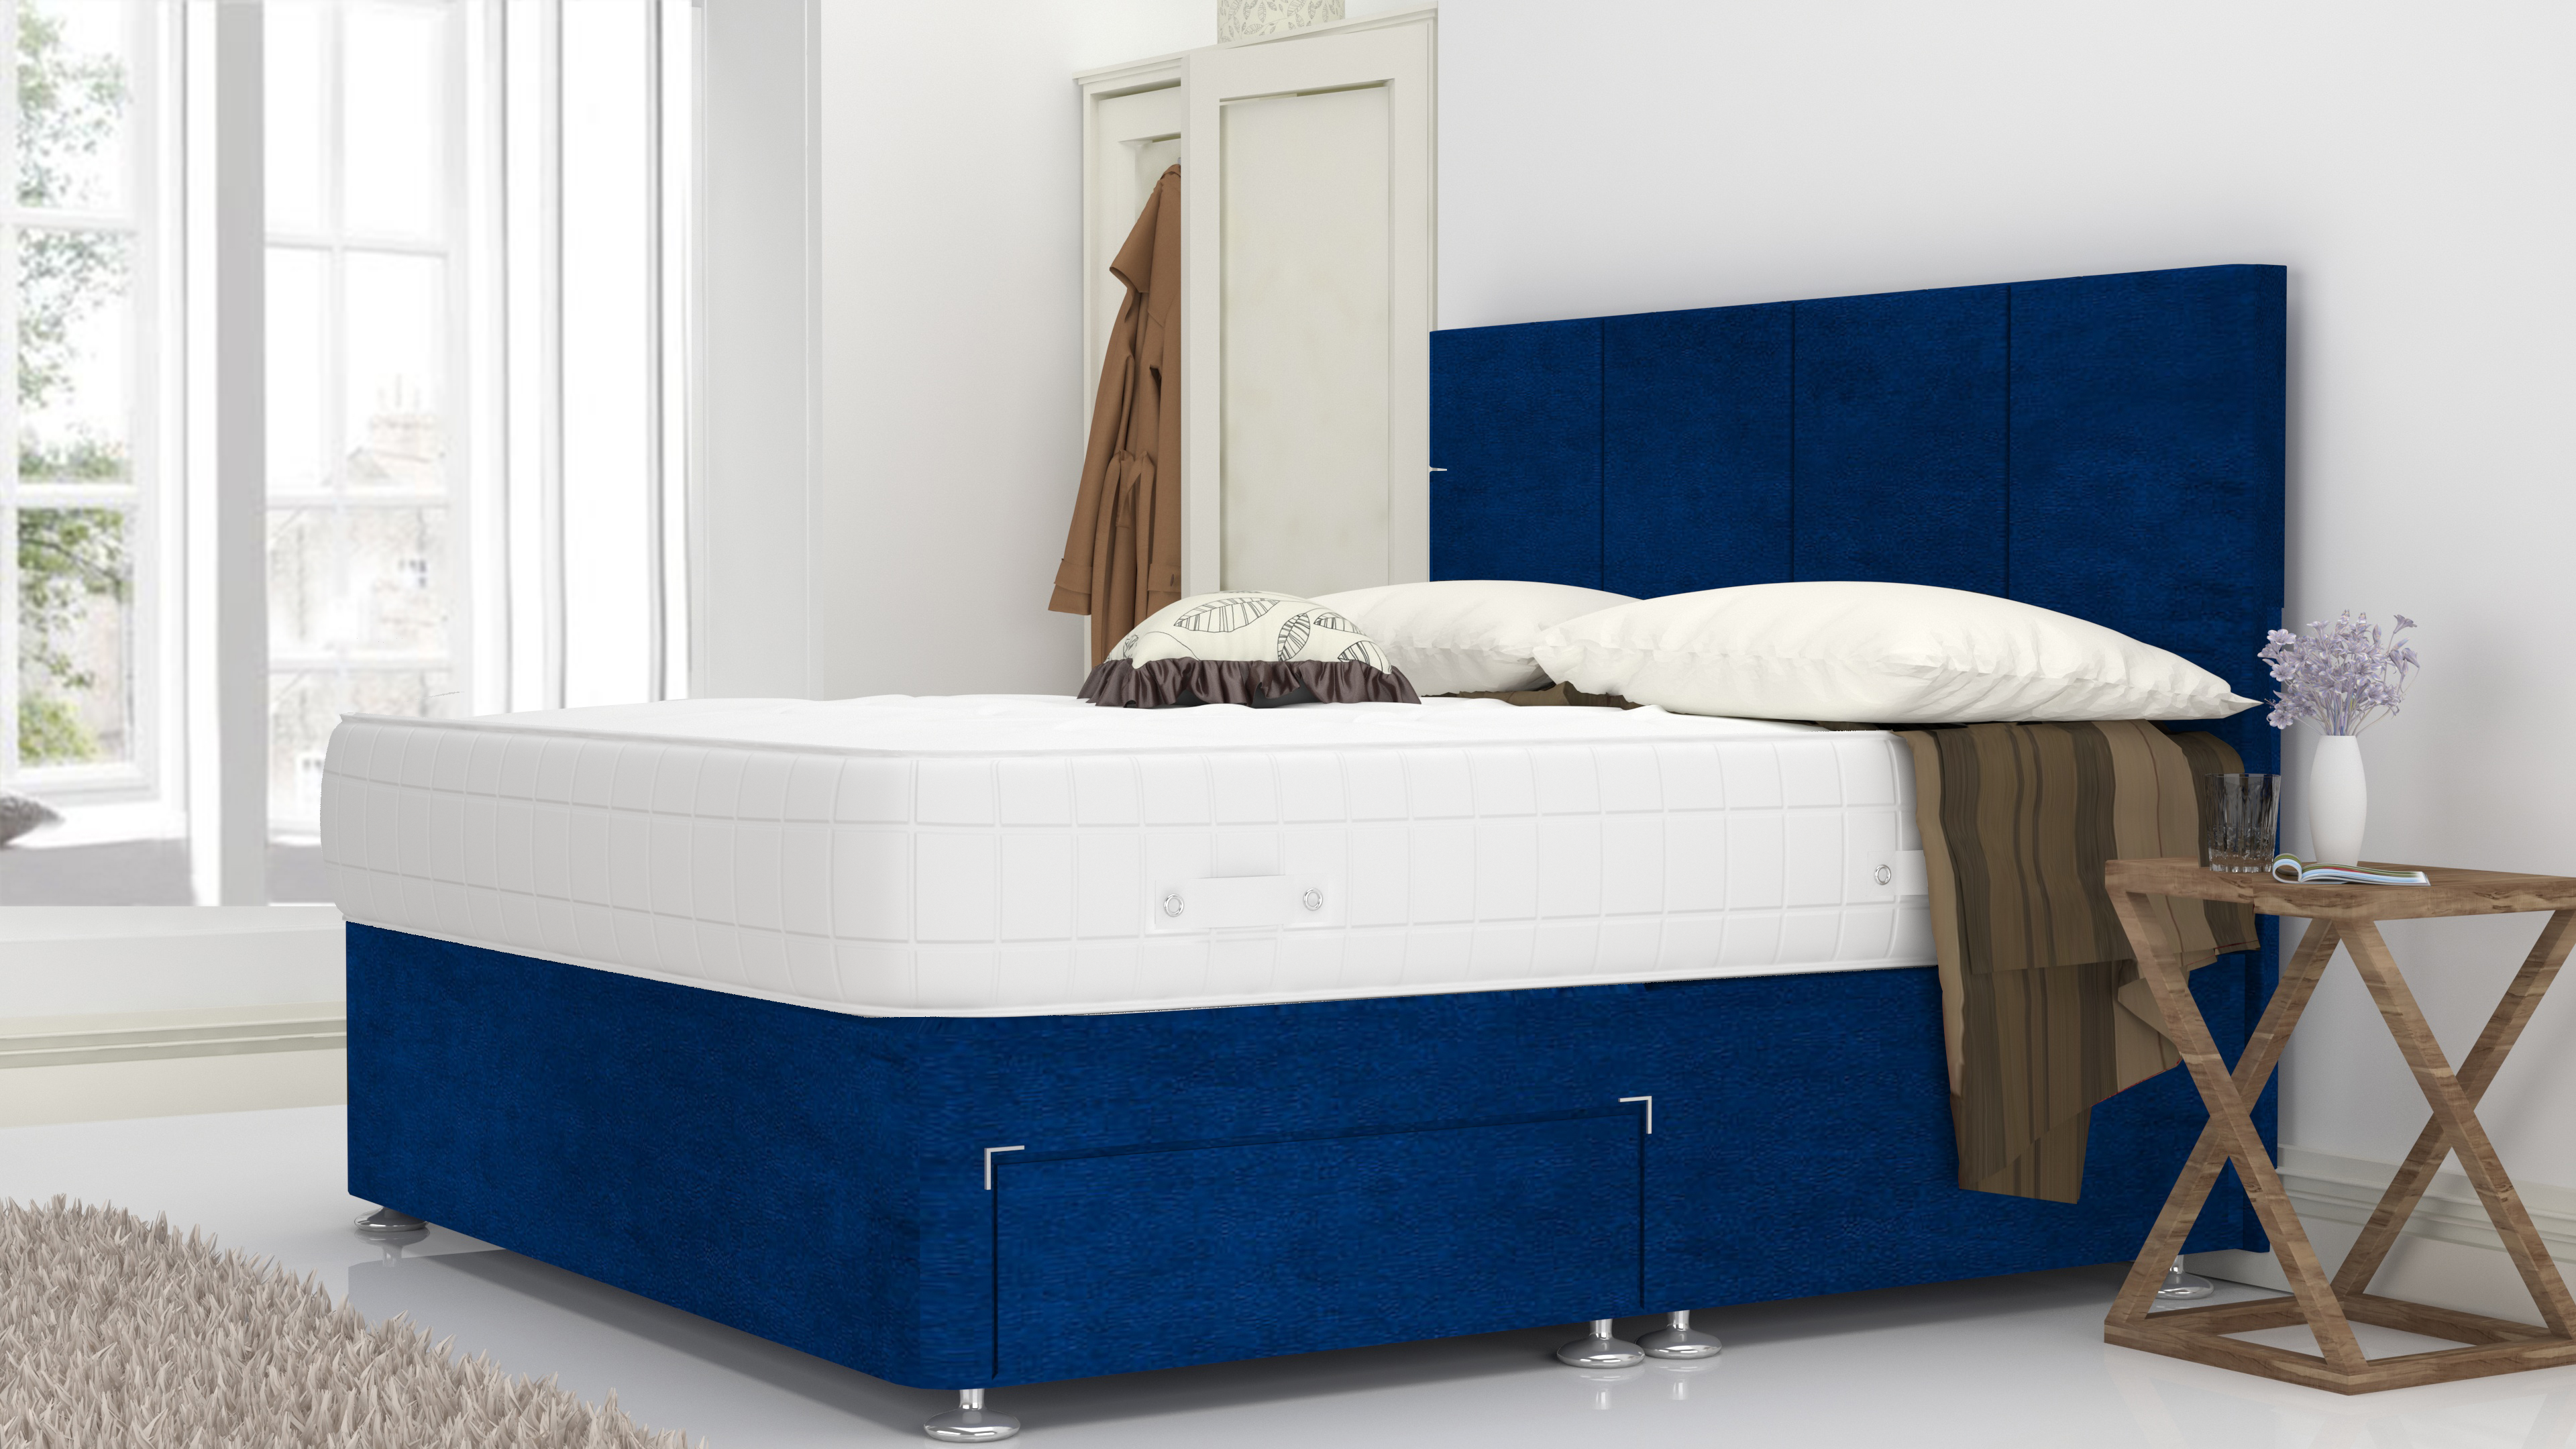 Blue Plush 5 Feet Divan Bed Set With 4 Panel Headboard (Included Feet) And Free Tinsel Top Mattress